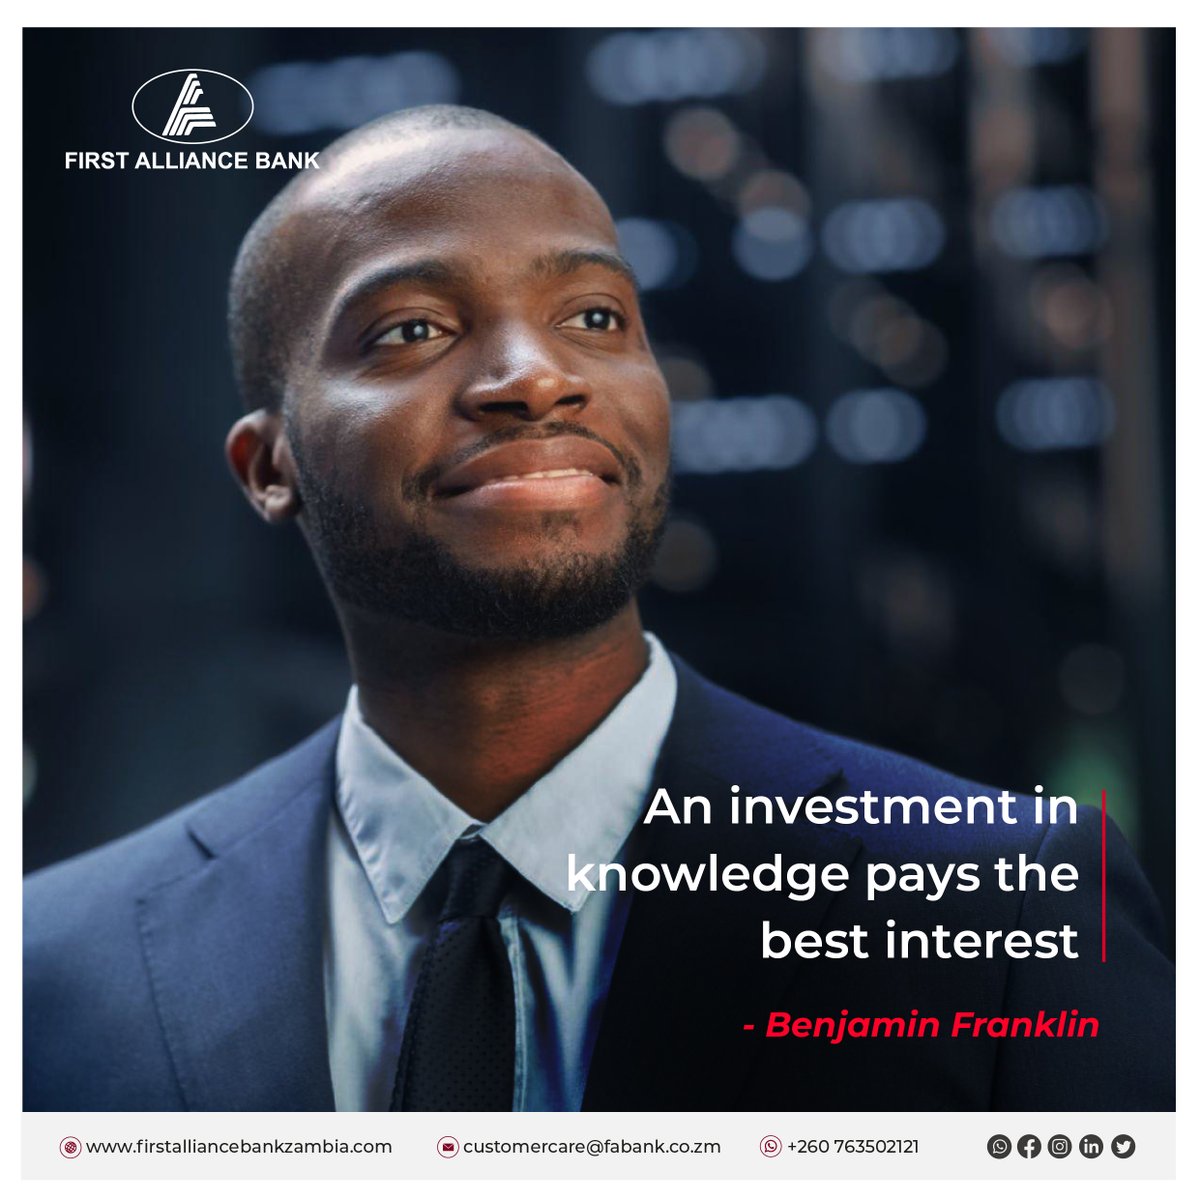 Investing in knowledge can help you prepare for a brighter and more secure financial future. 

#FirstAllianceBank #FAB #Zambia
#FinancialLiteracy #BankWithUs
#AchieveFinancialDream #EconomicGrowth #GoCashless #FinancialFreedom #FinancialIndependent
#FinancialEducation #Investing